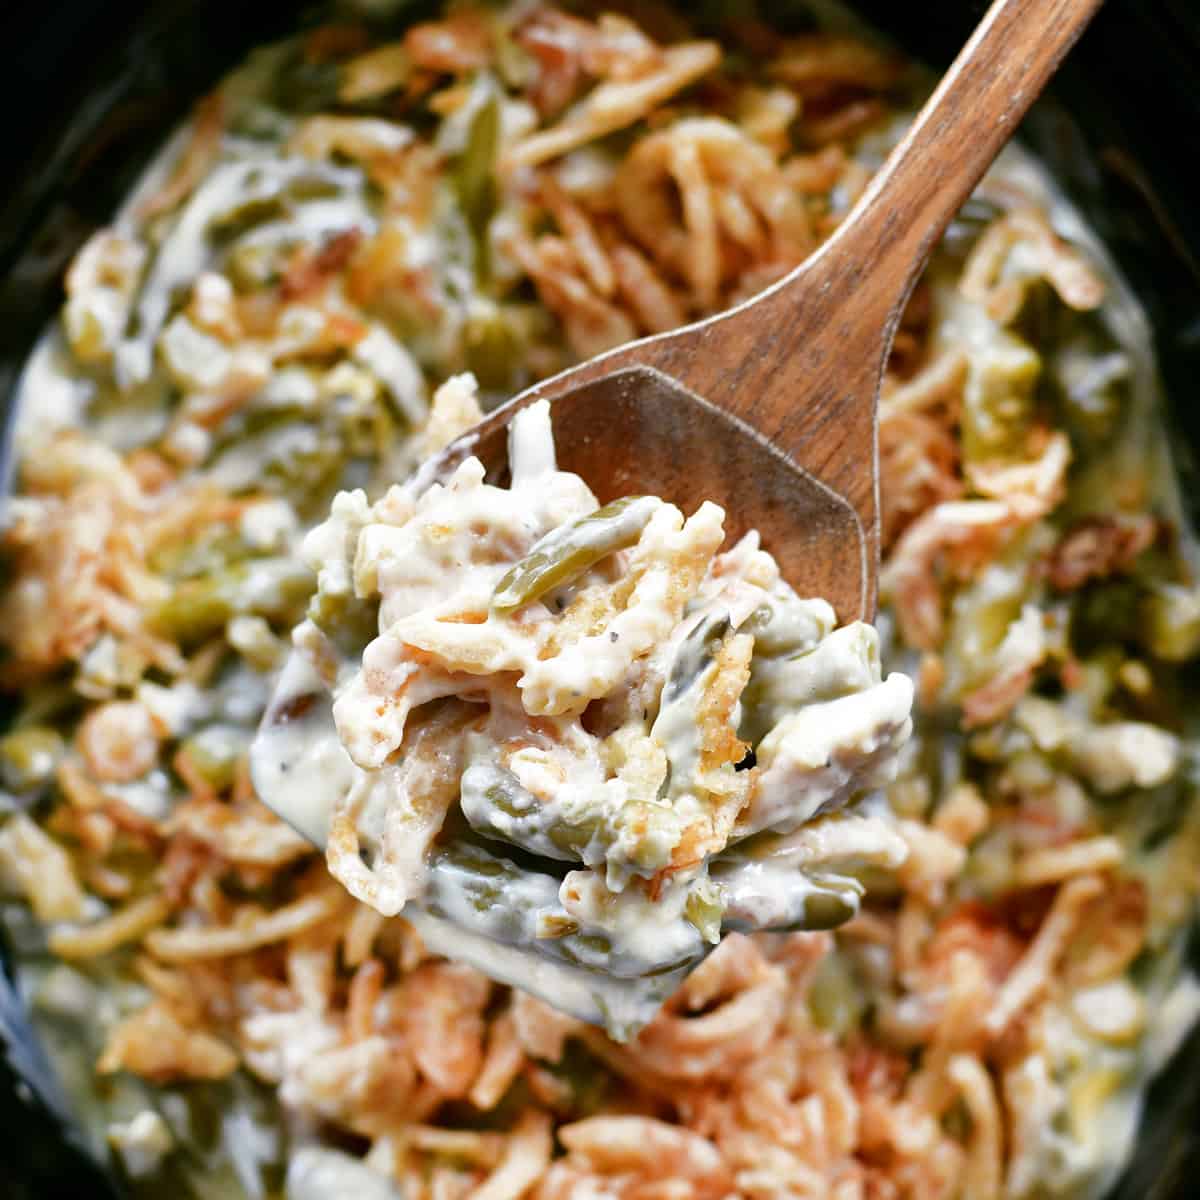 A wooden spoon with green bean casserole in it.